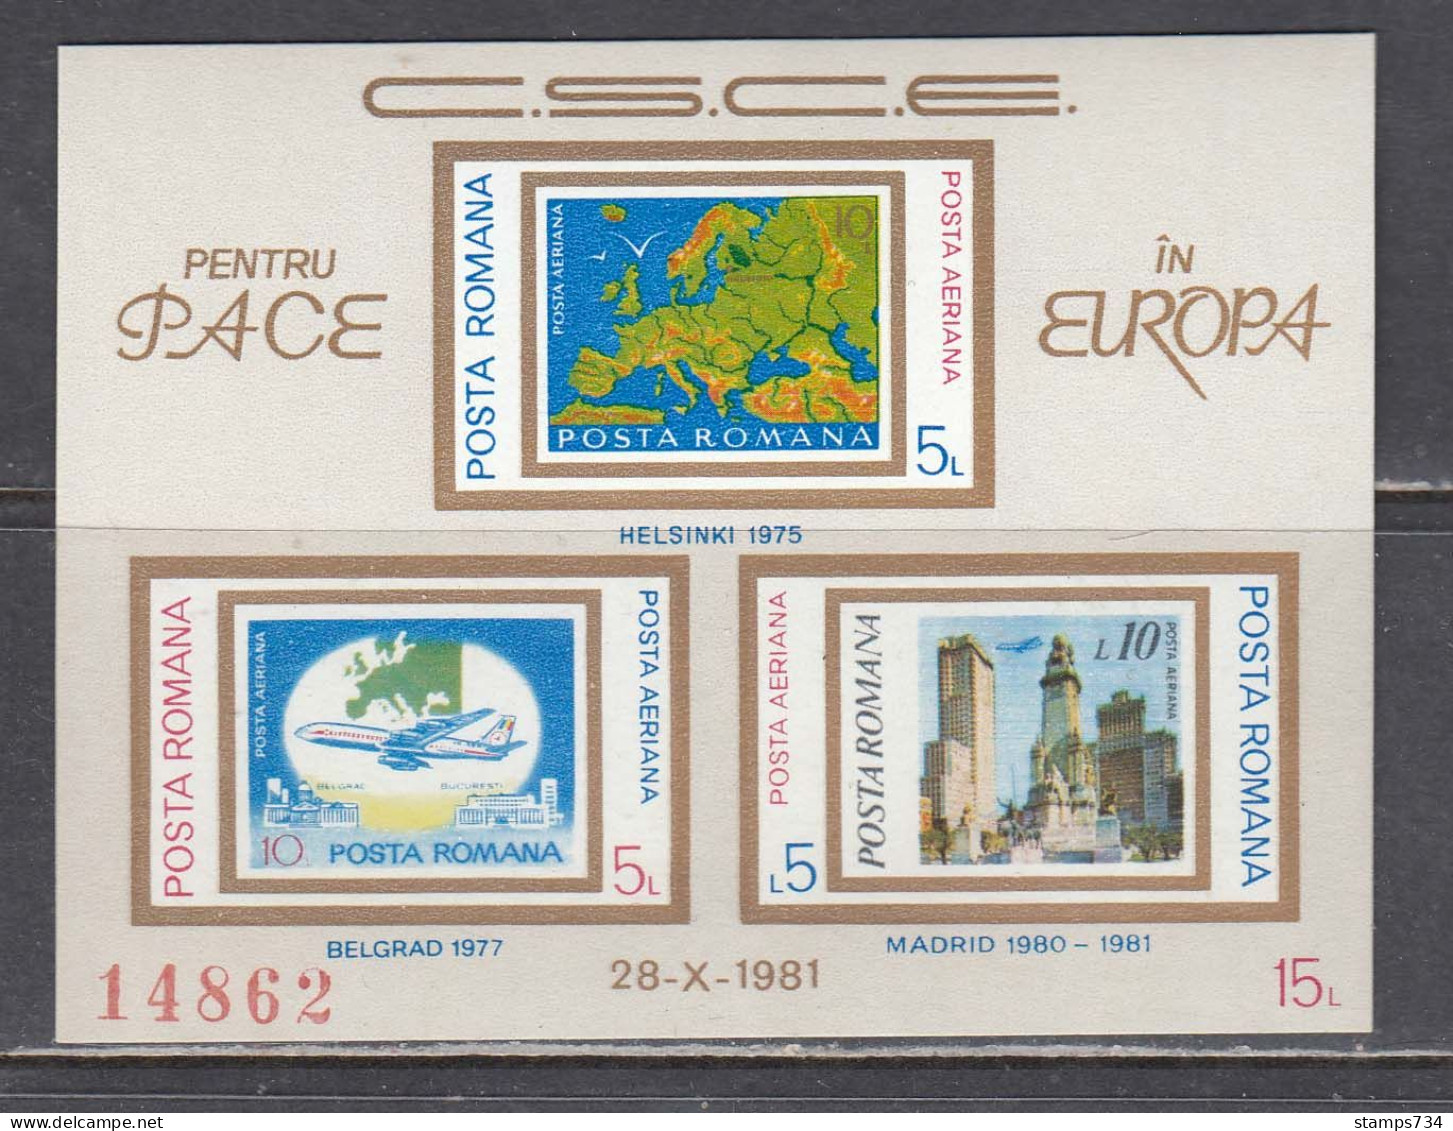 Romania 1981 - Conference On Security And Cooperation In Europe (CSCE), Madrid, Mi-Nr. Bl. 183, MNH** - Neufs